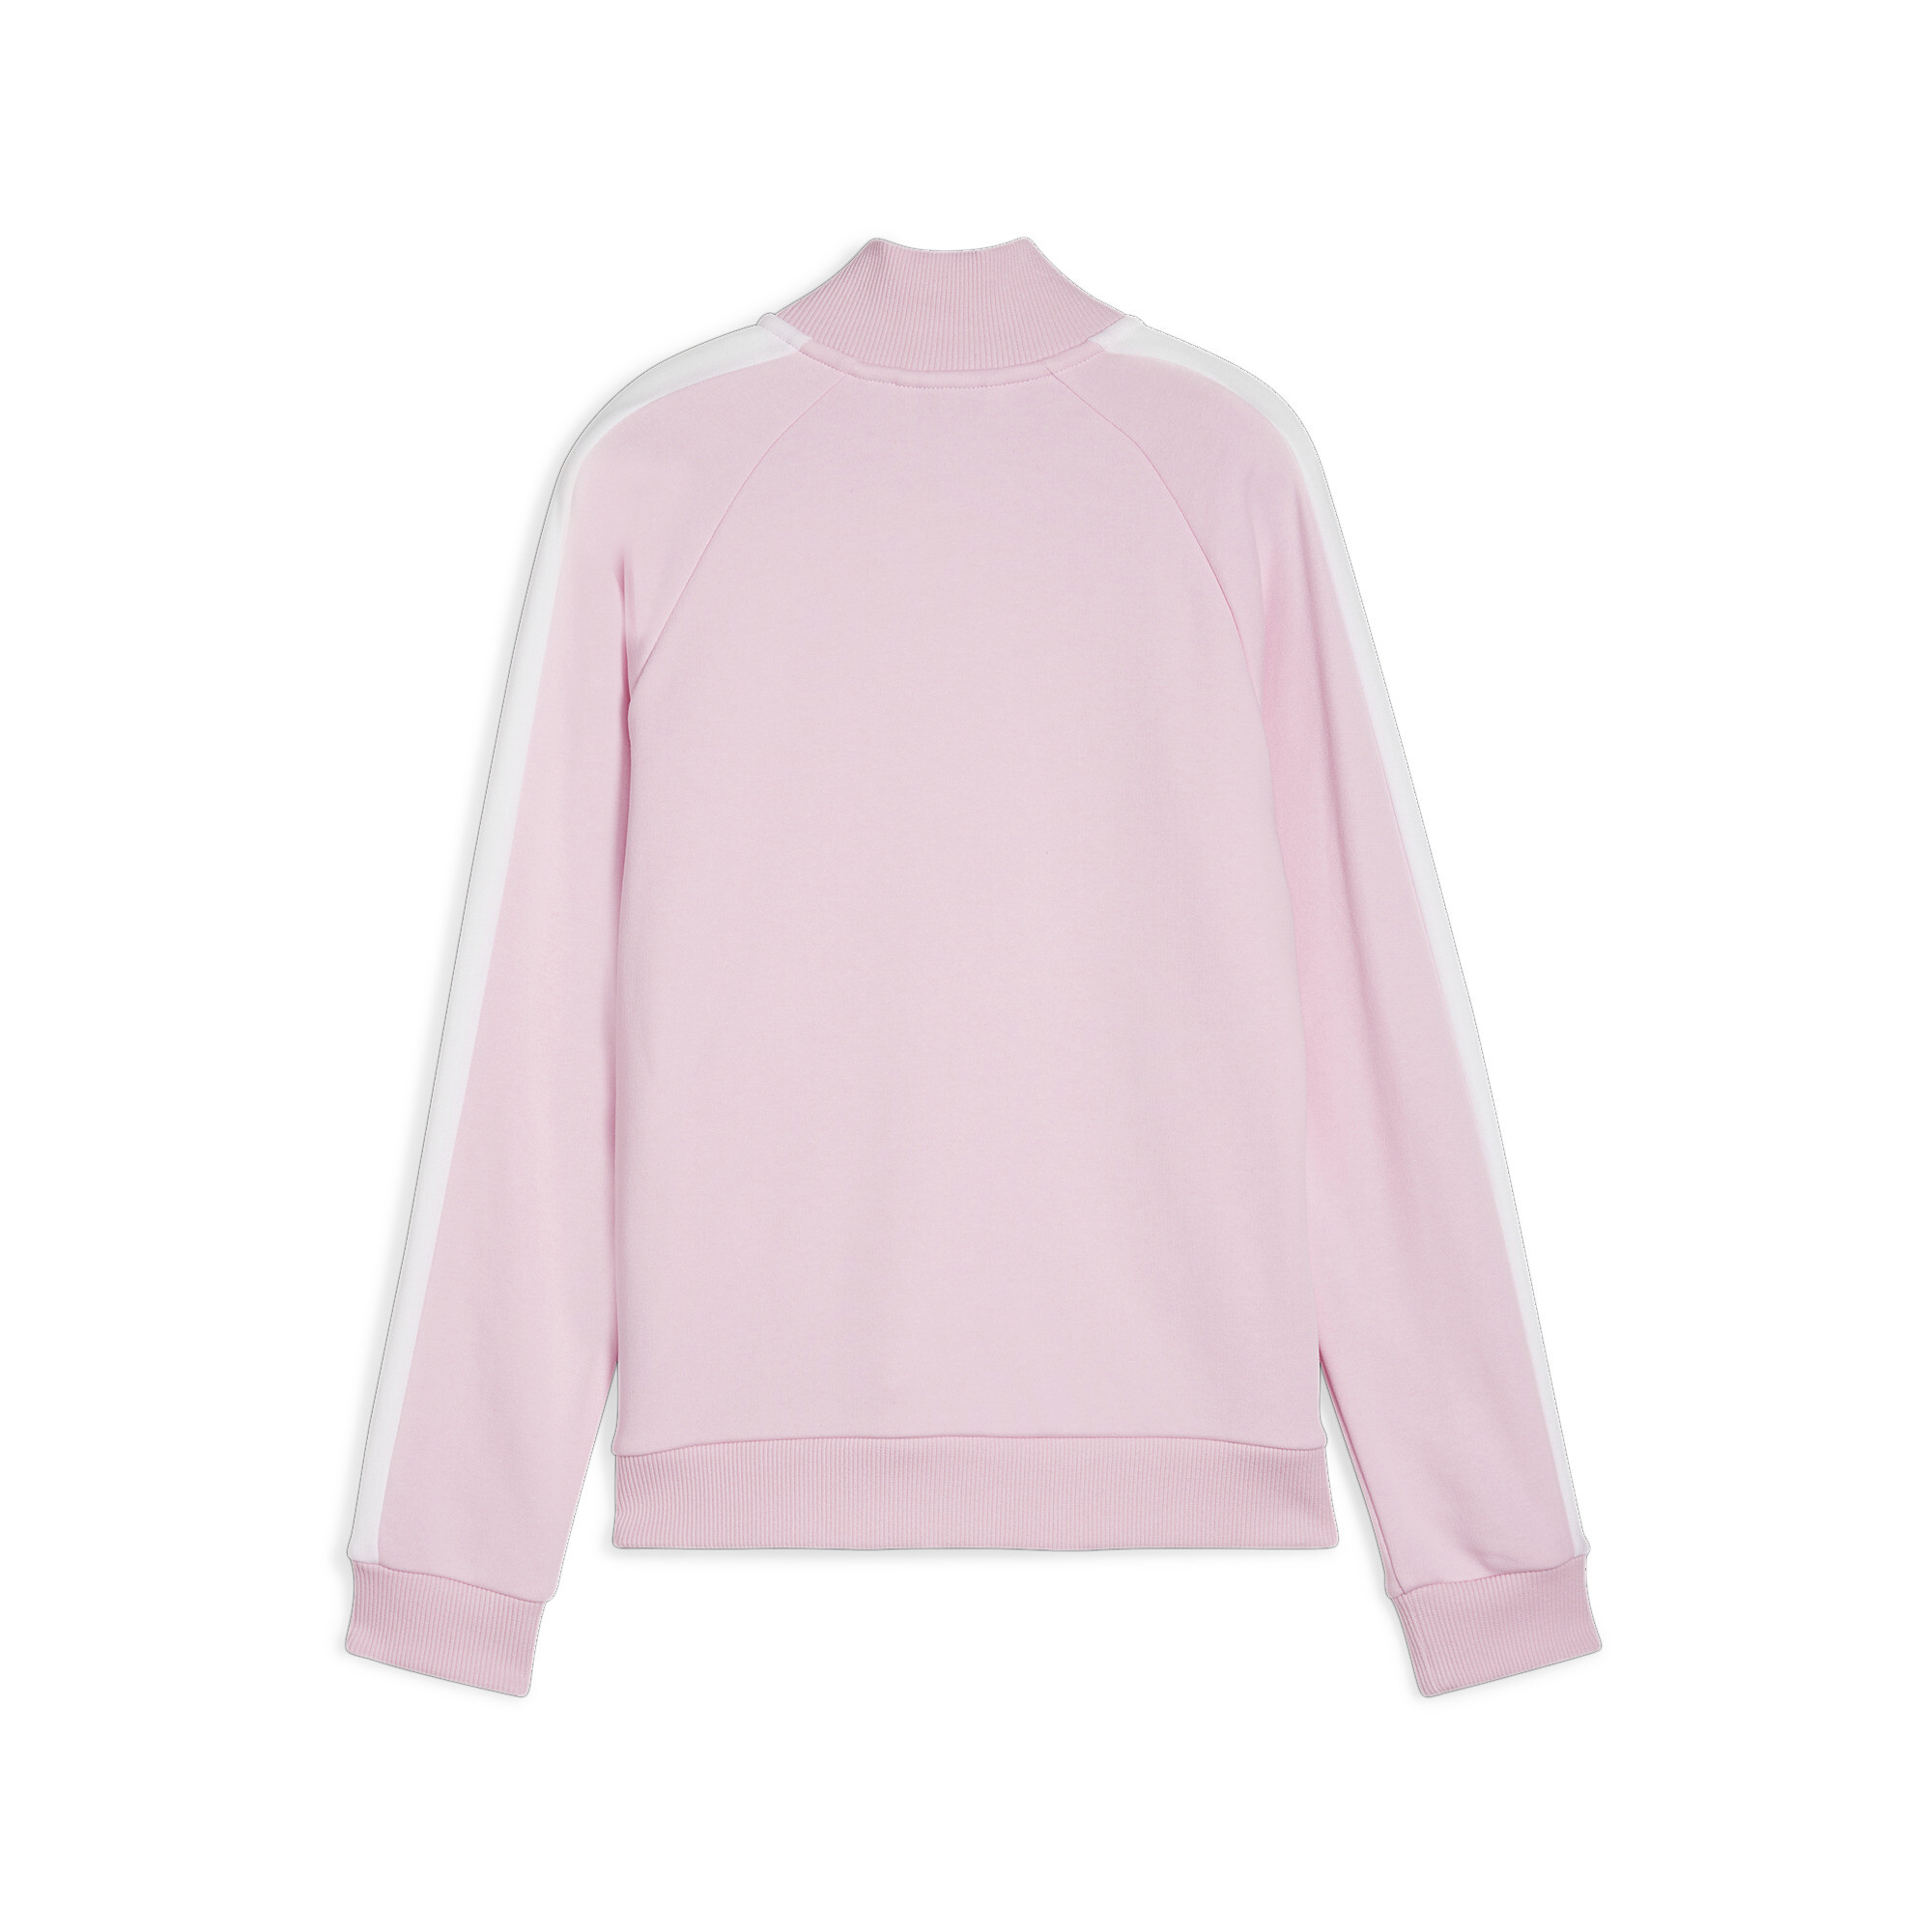 PUMA Classics T7 Track Jacket In Pink, Size 11-12 Youth